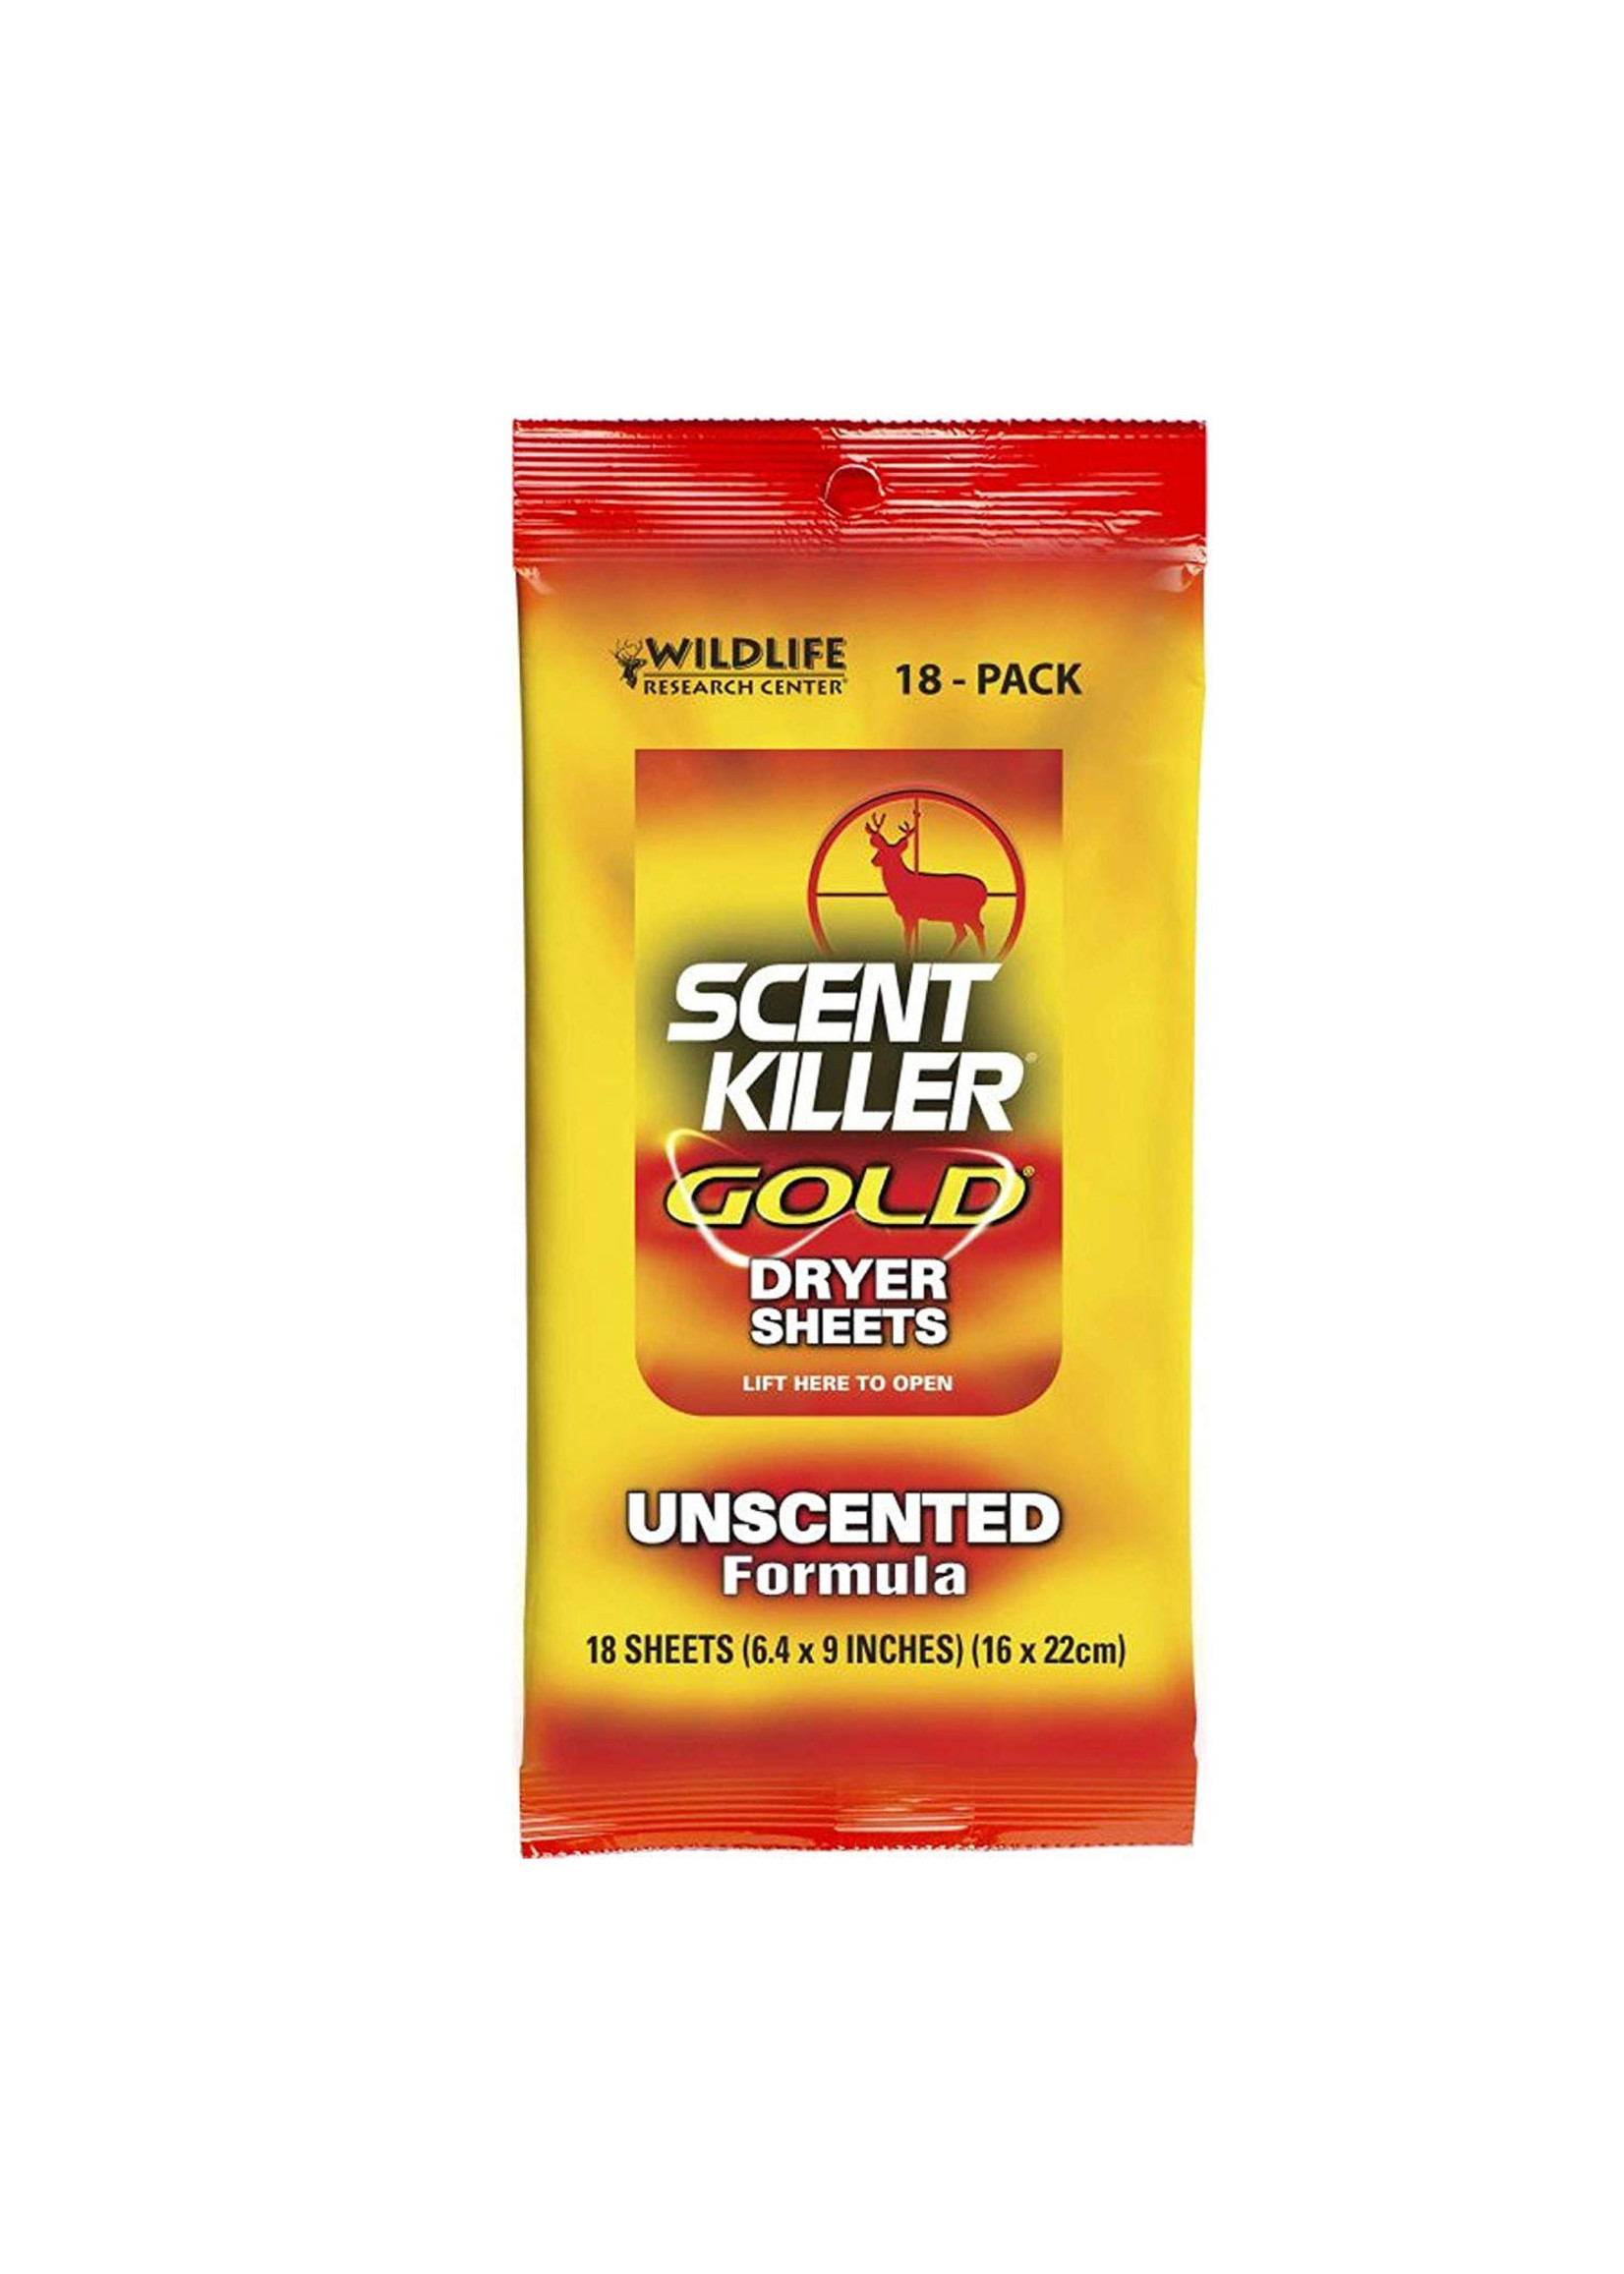 Wildlife Research Center scent killer gold dryer sheets